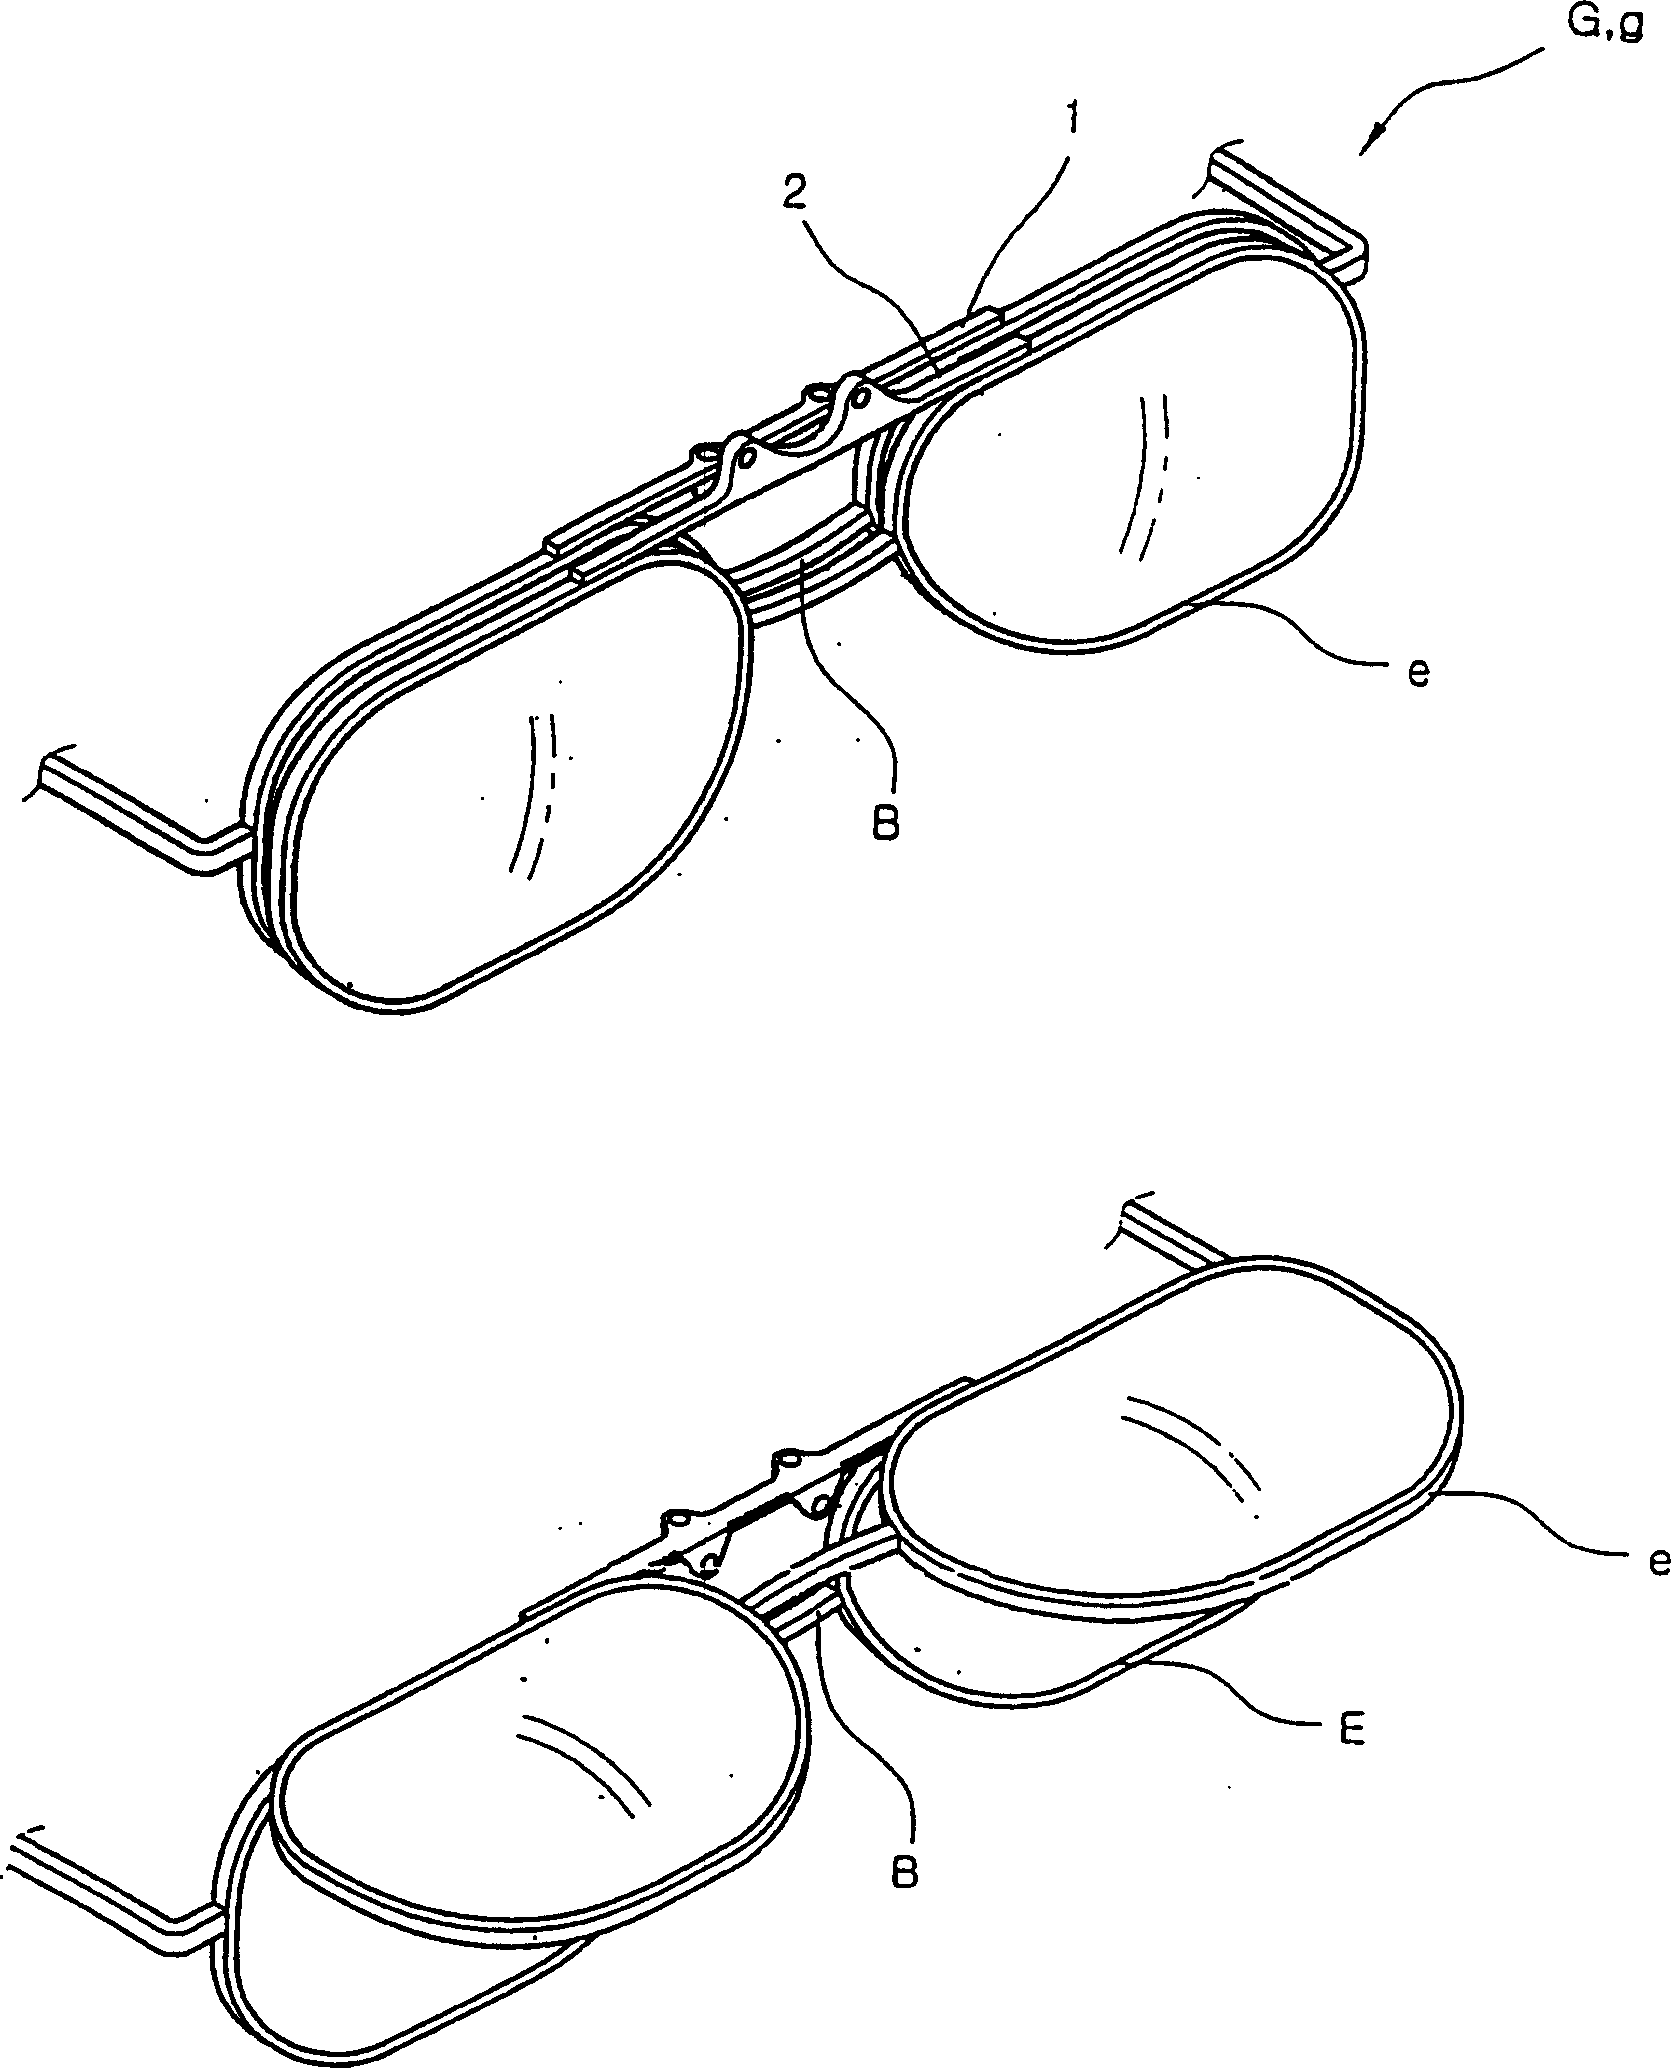 Eyeglasses having anxiliary glasses, which are easily detachable and opened in front using magnet